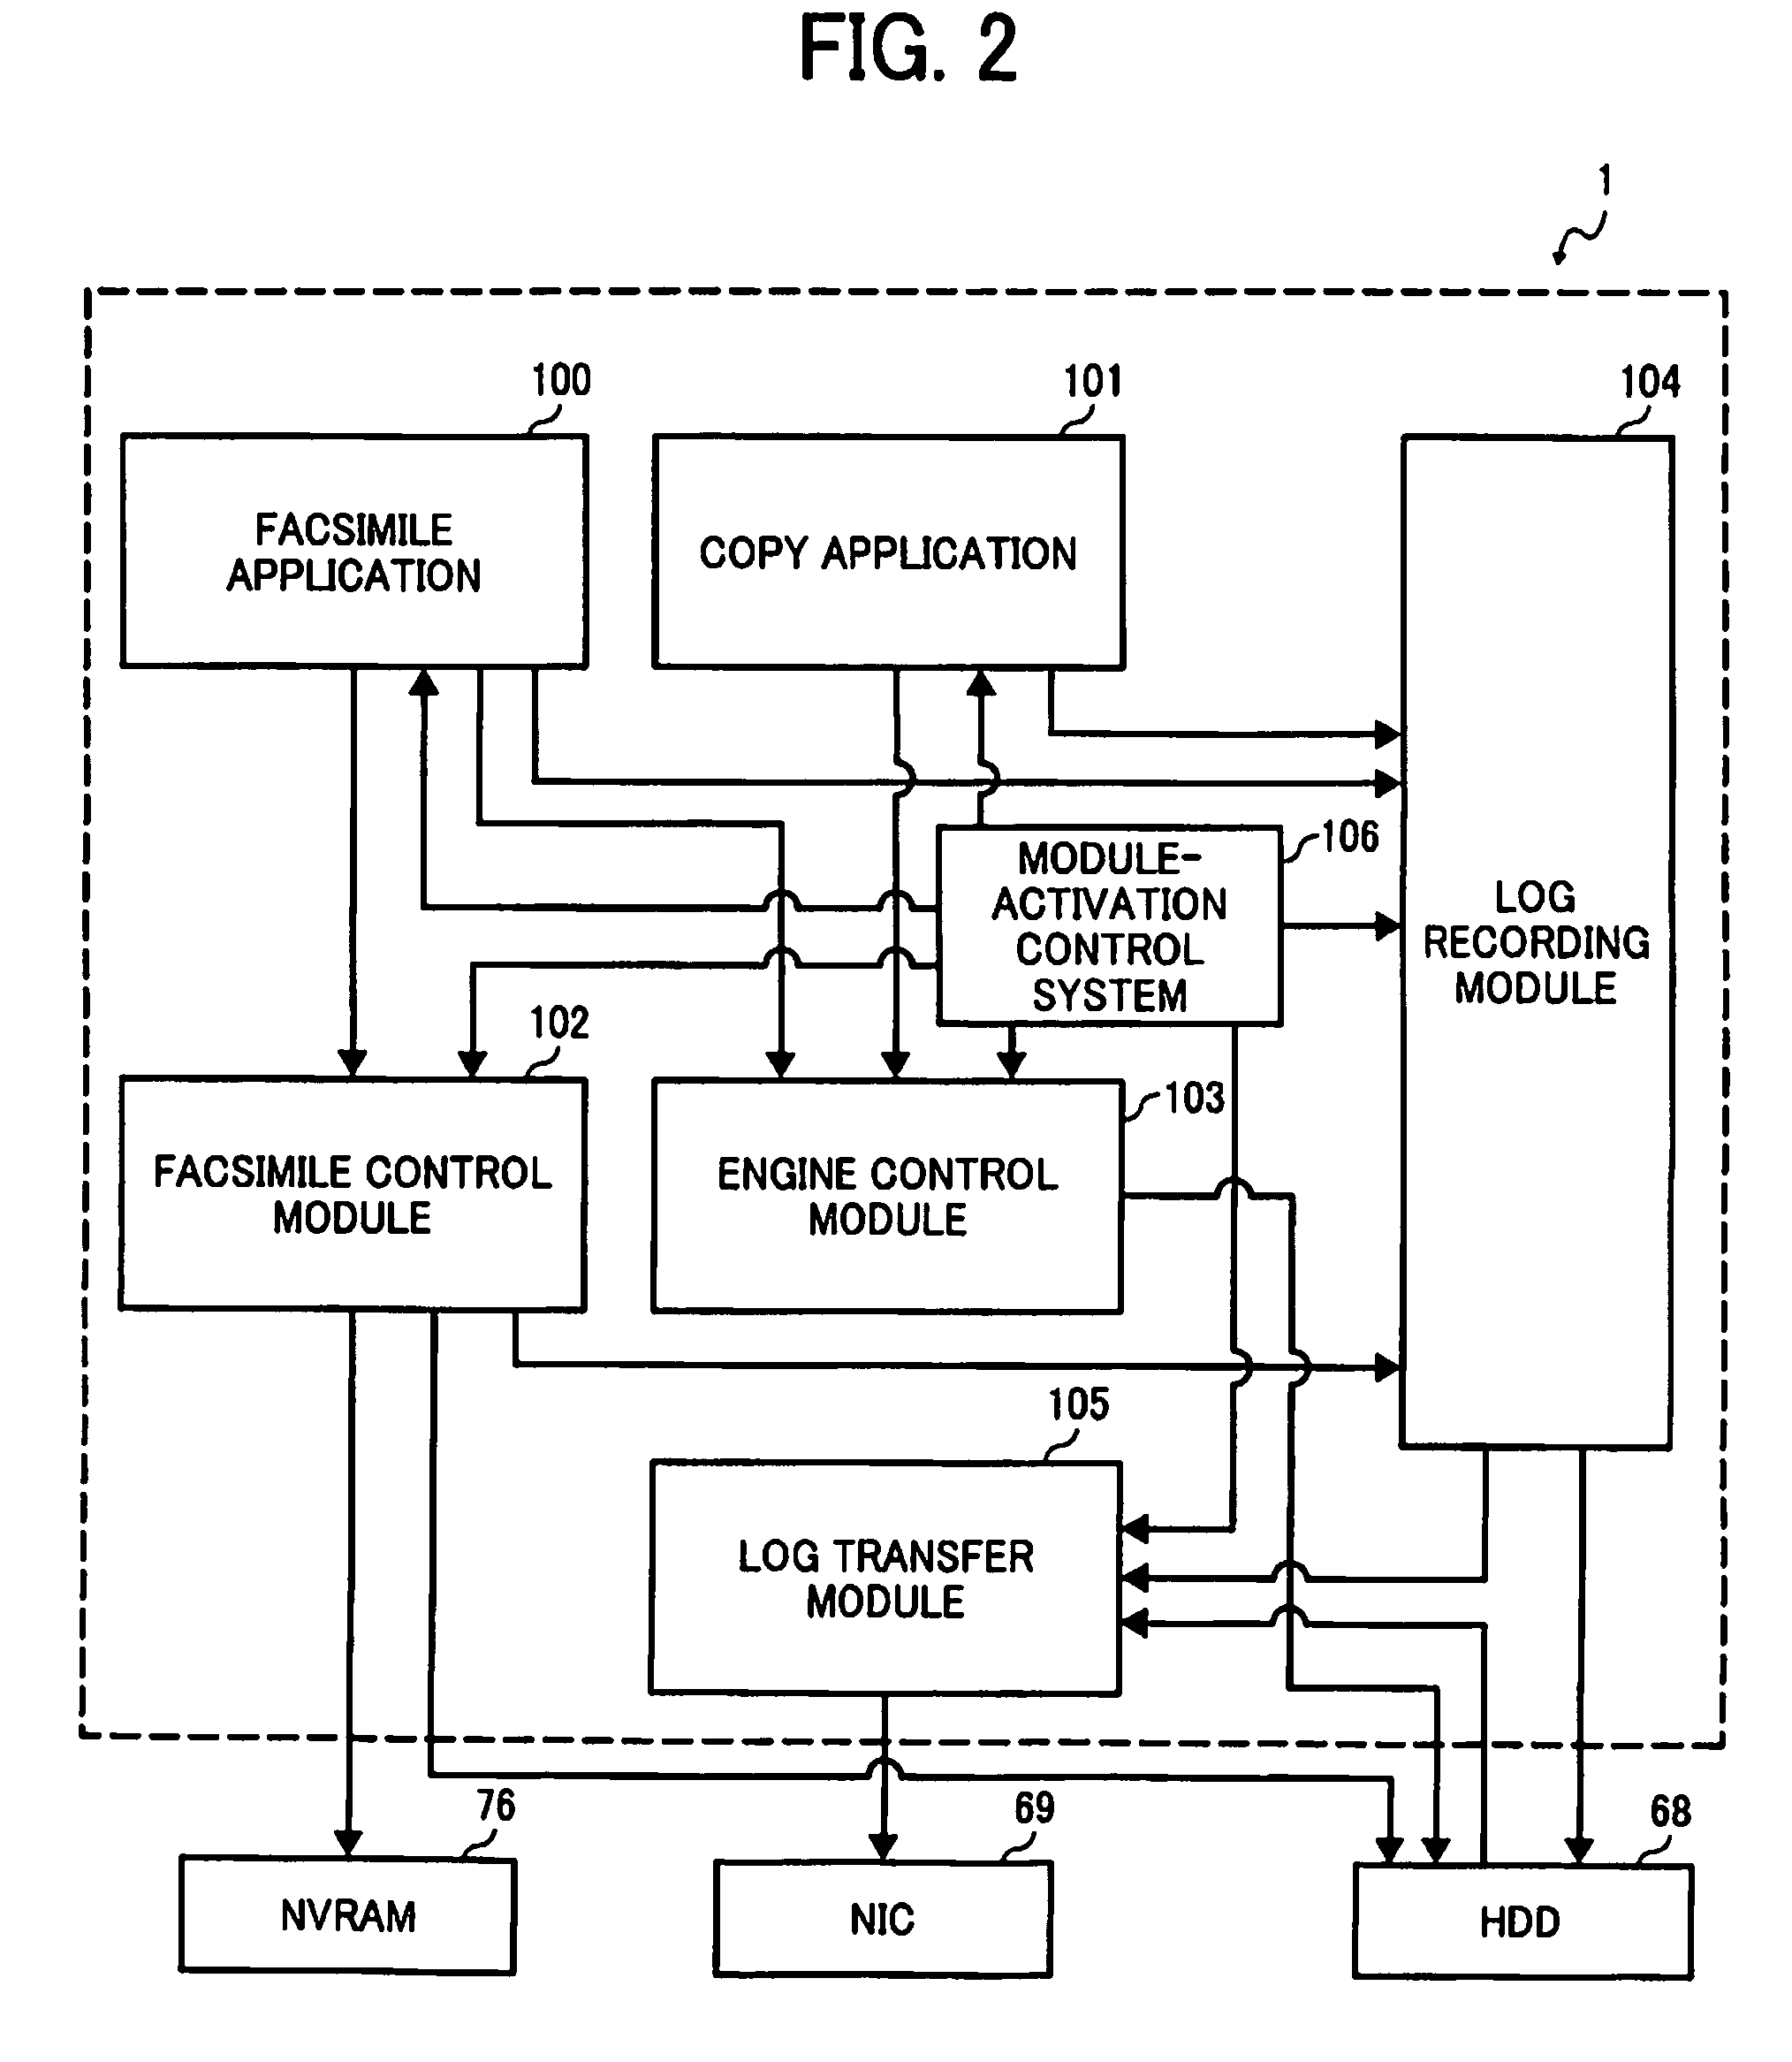 Image processing apparatus, method, and computer-readable recording medium for recording a log of a job